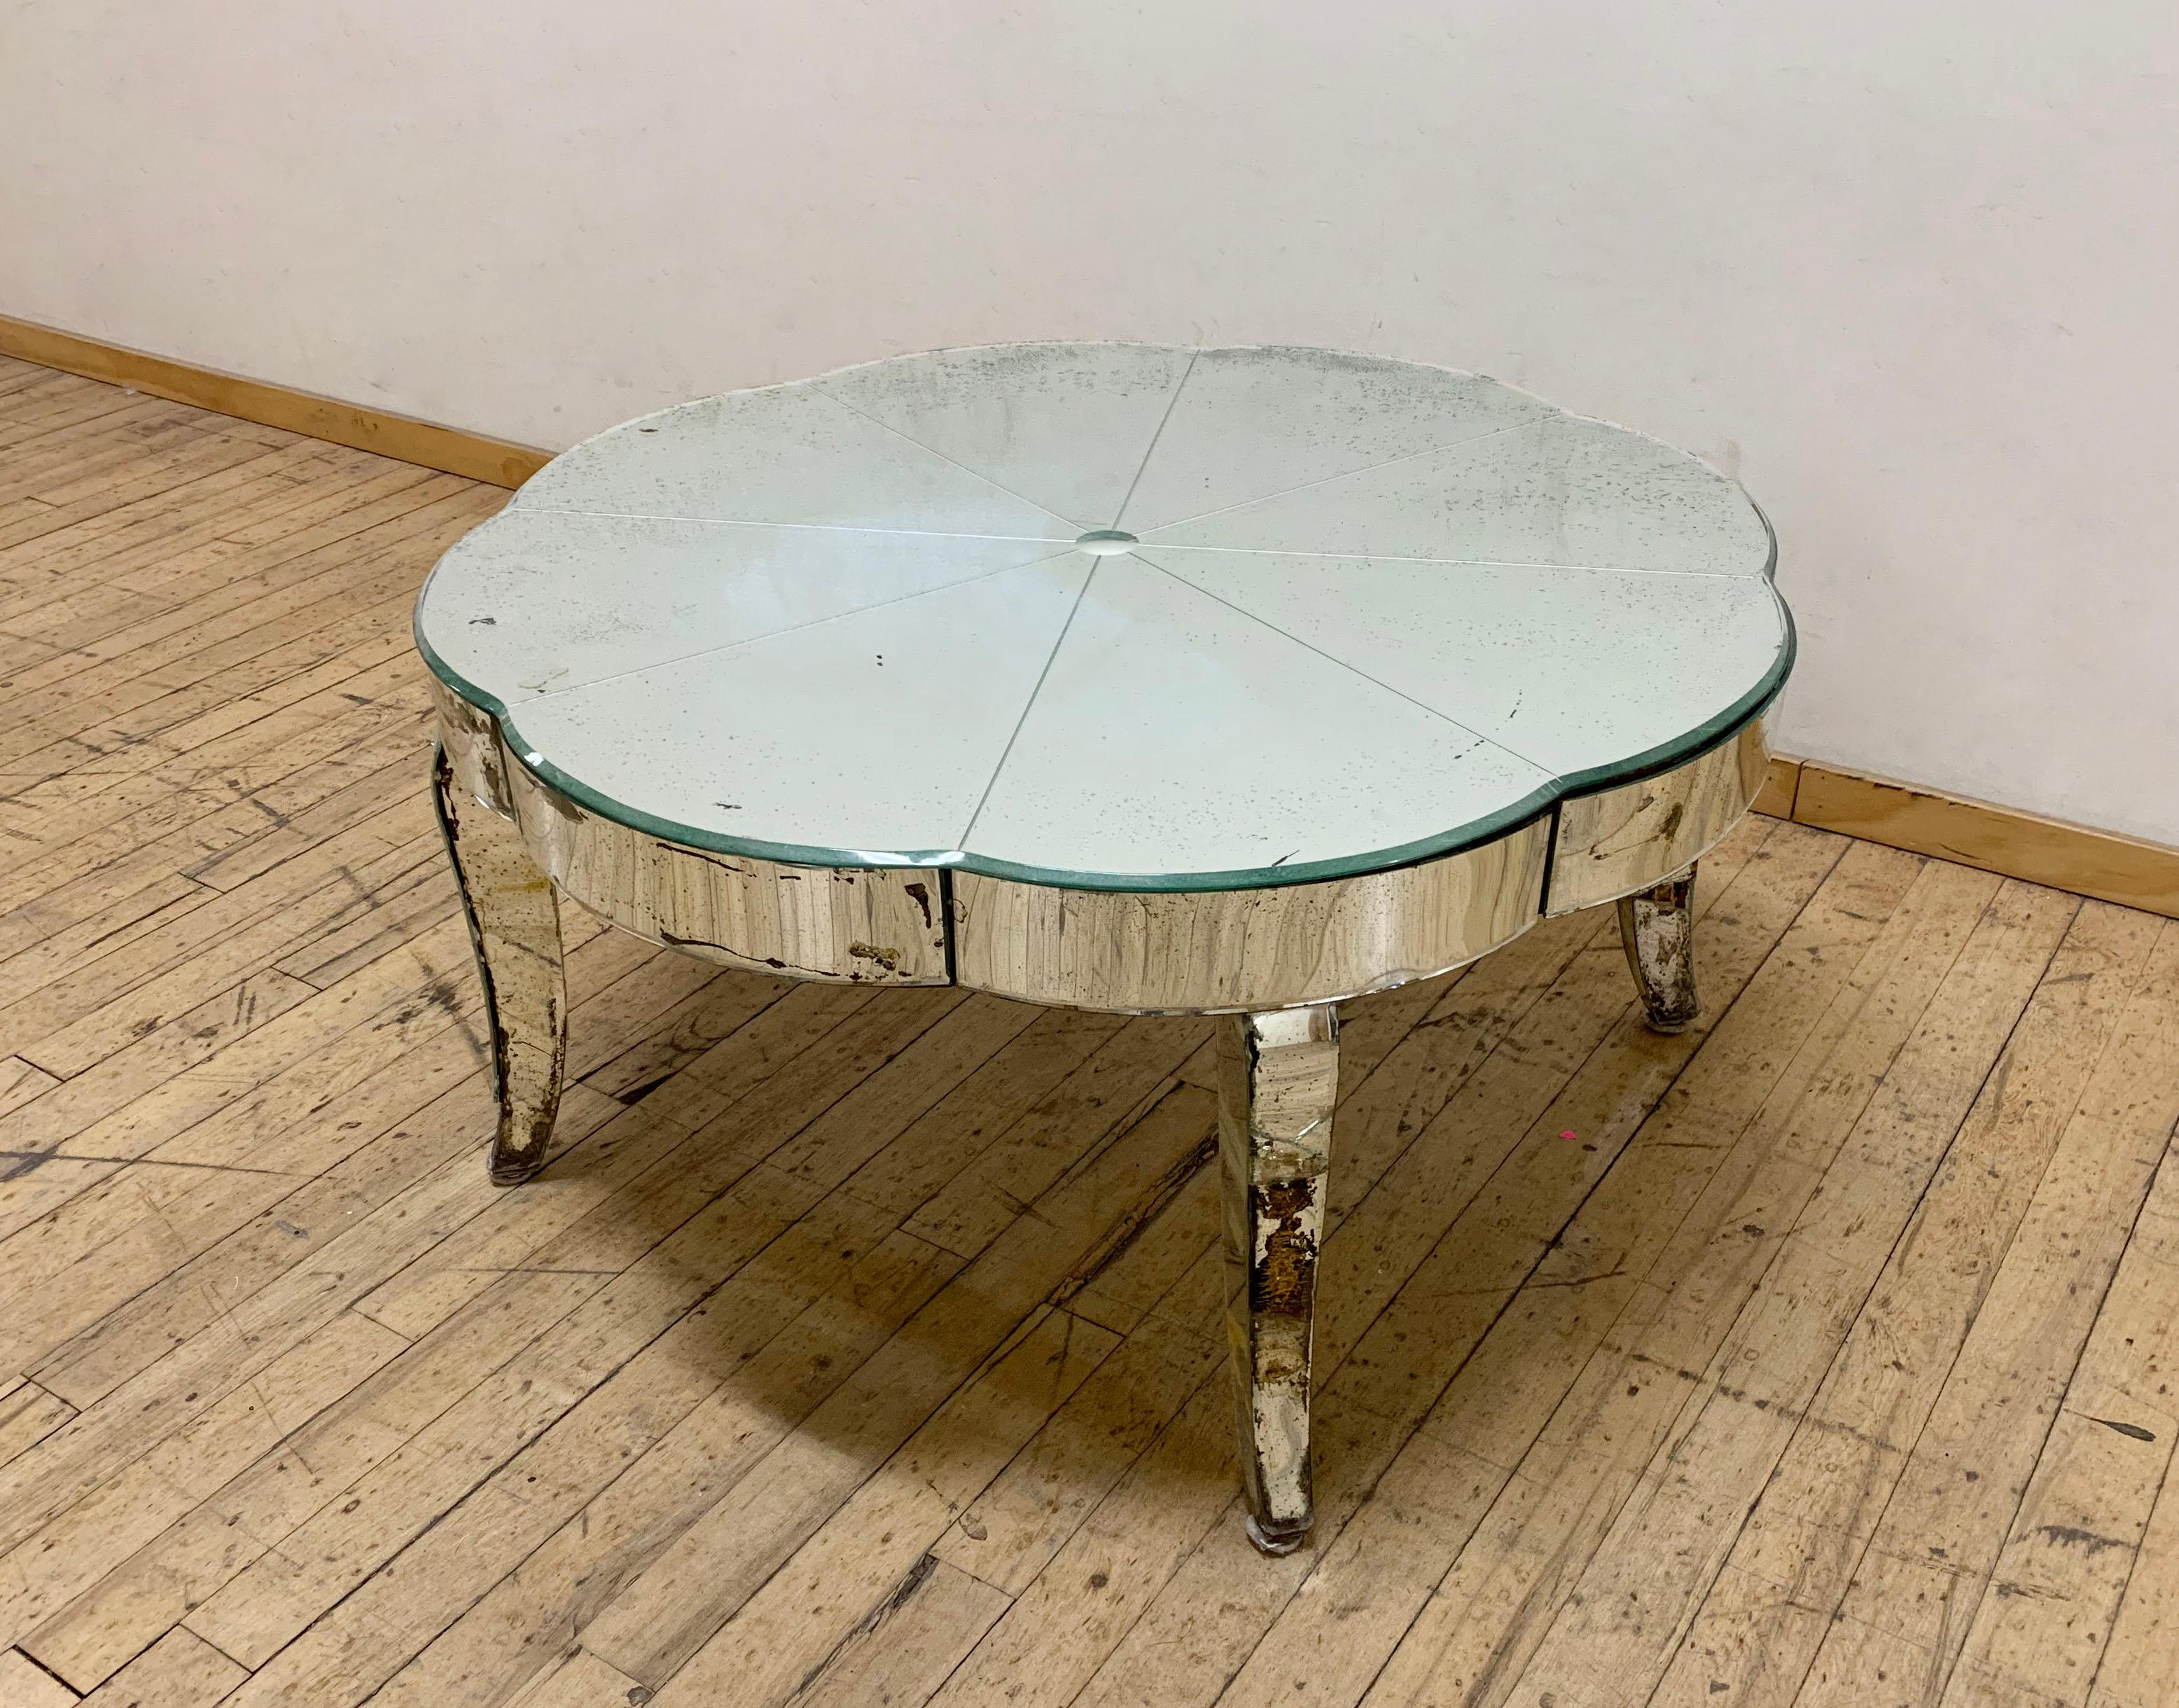 Period French or Italian Deco Mirrored Coffee Table In Distressed Condition For Sale In Chicago, IL